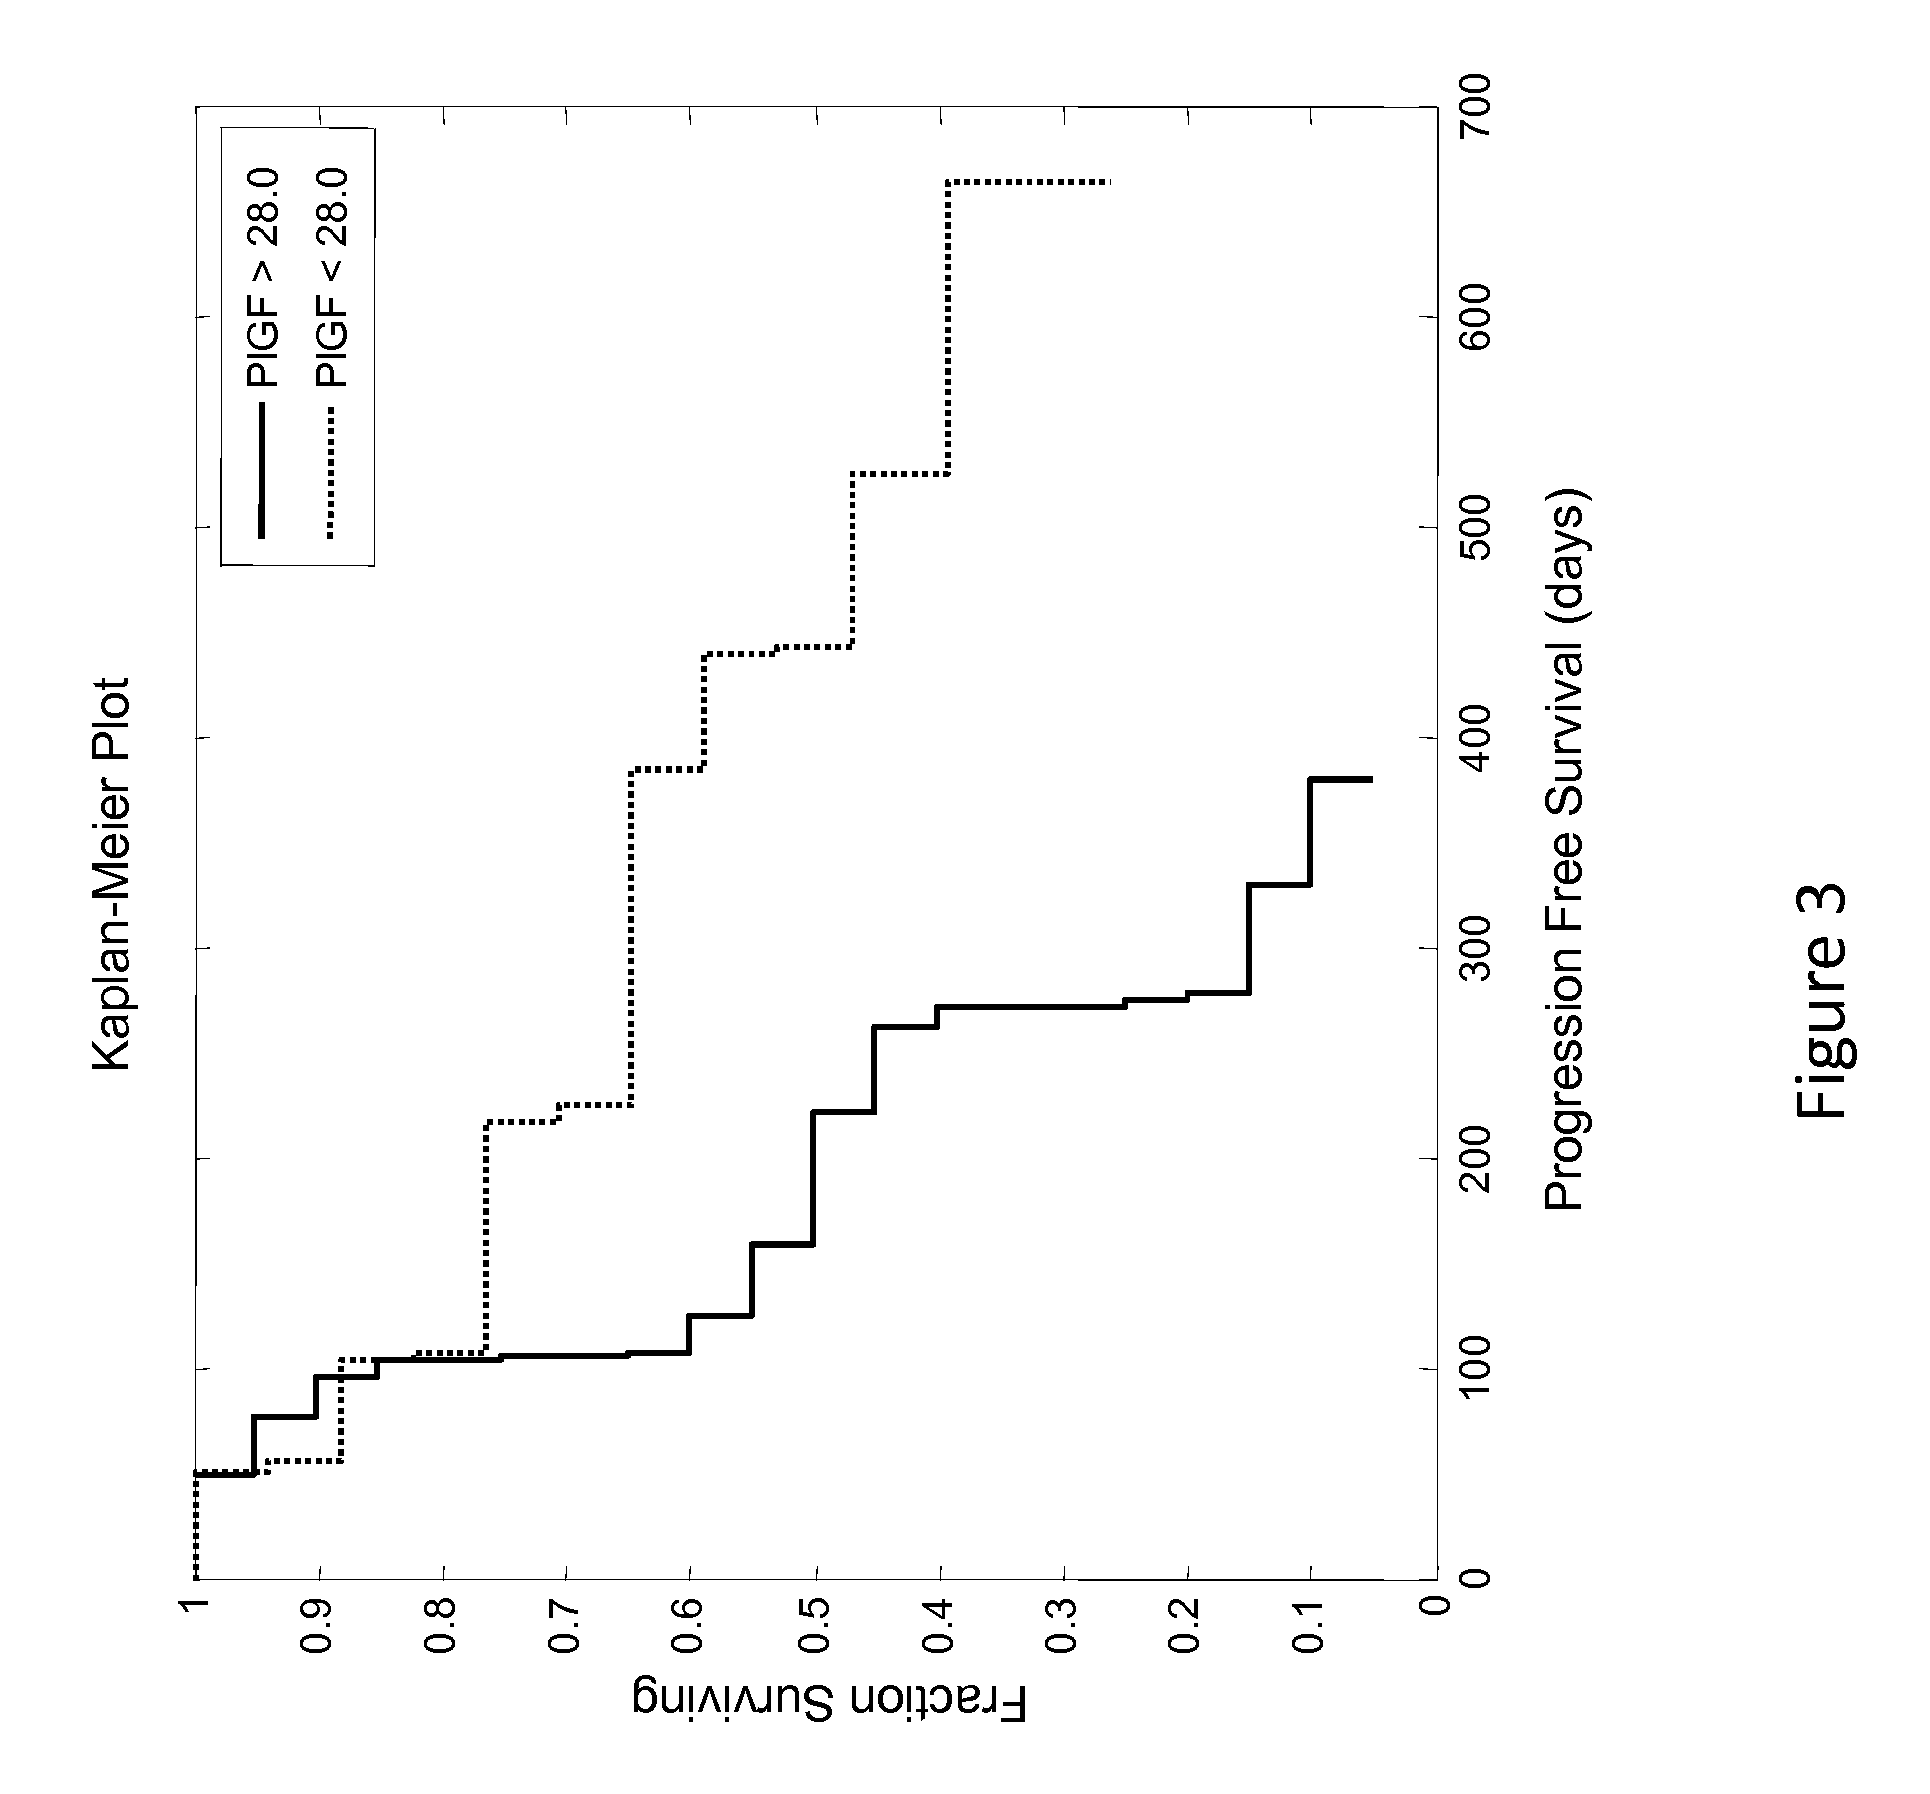 Predictive biomarker of survival in the treatment of renal cell carcinoma